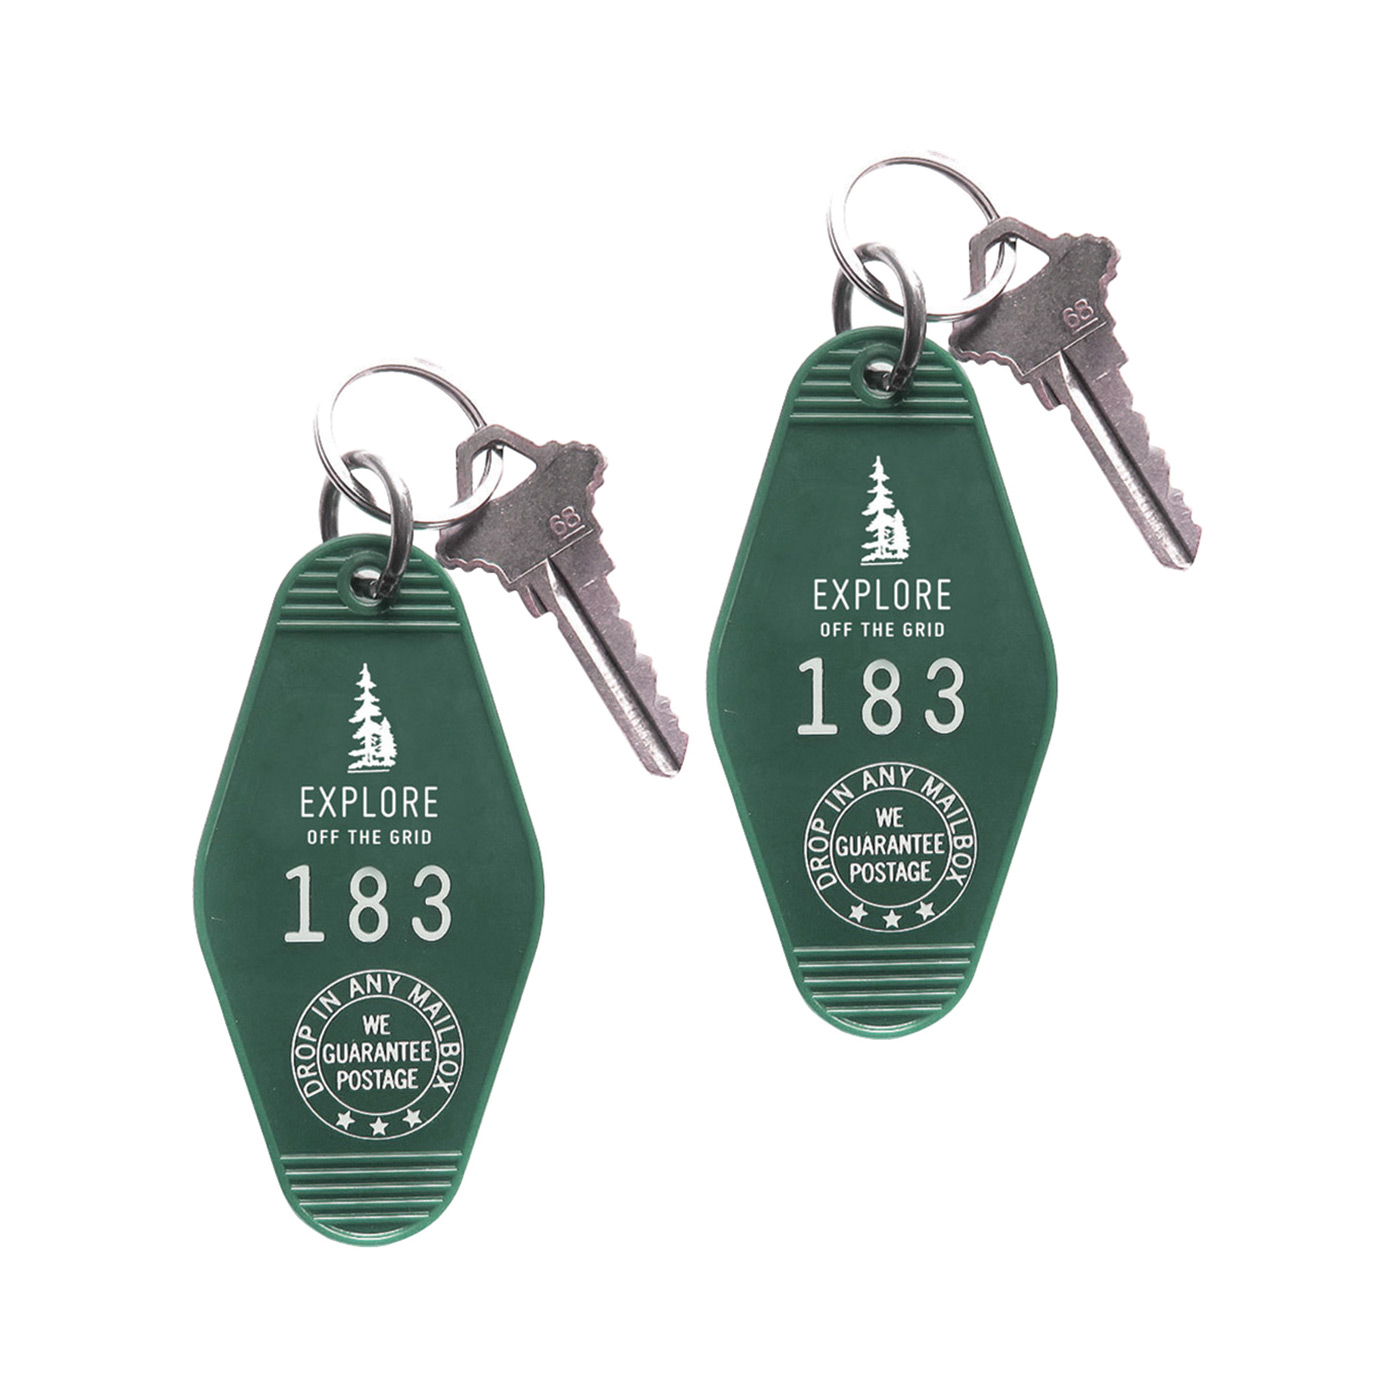 Explore Off The Grid Key Ring $8